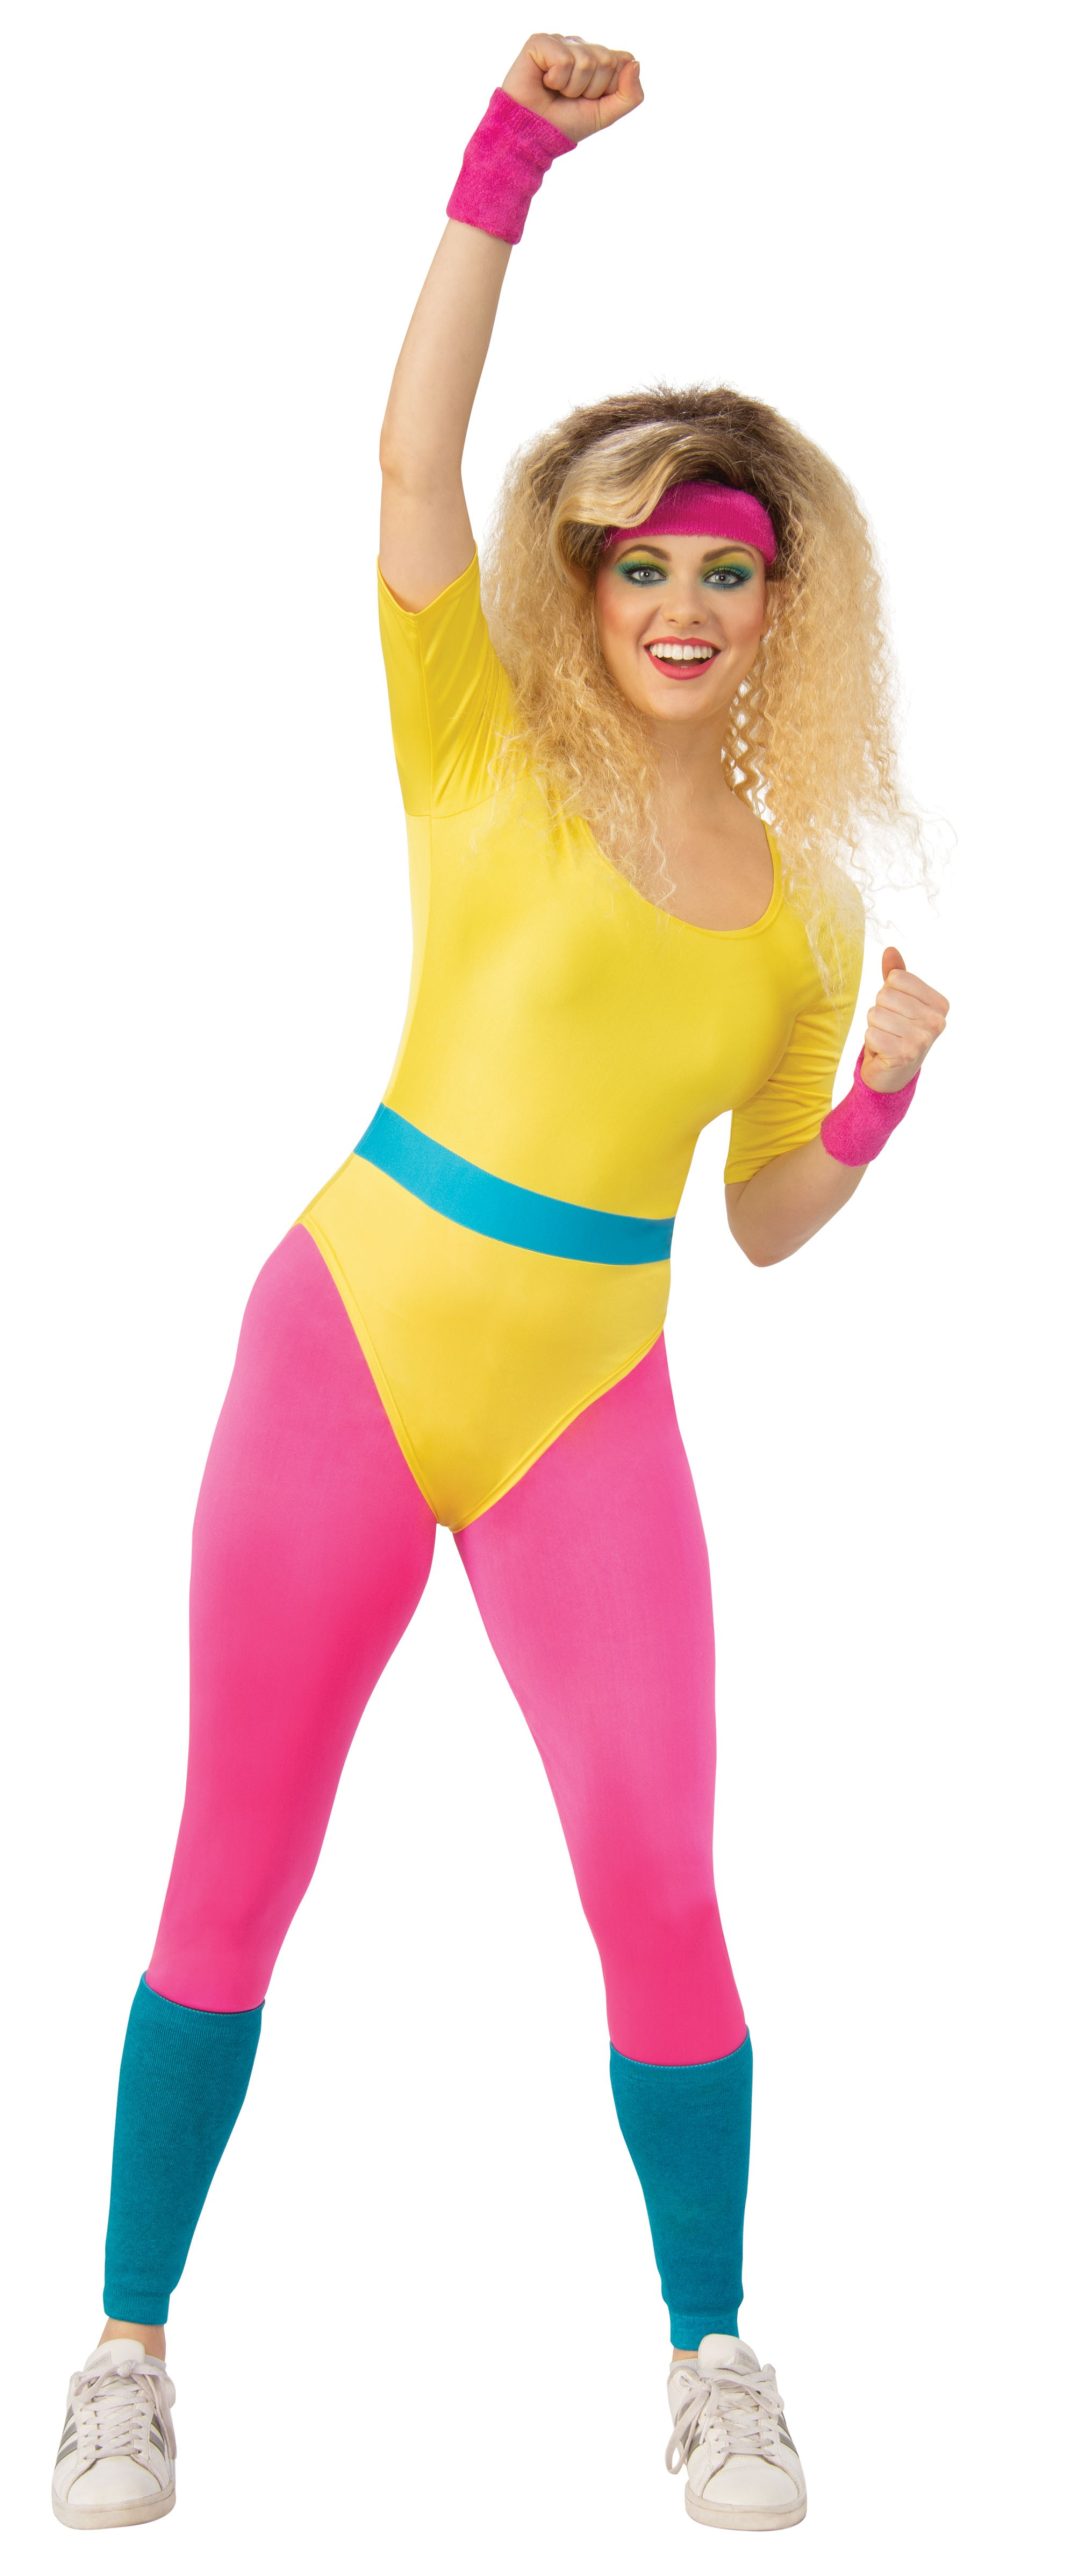 80's Workout Girl Costume for Women